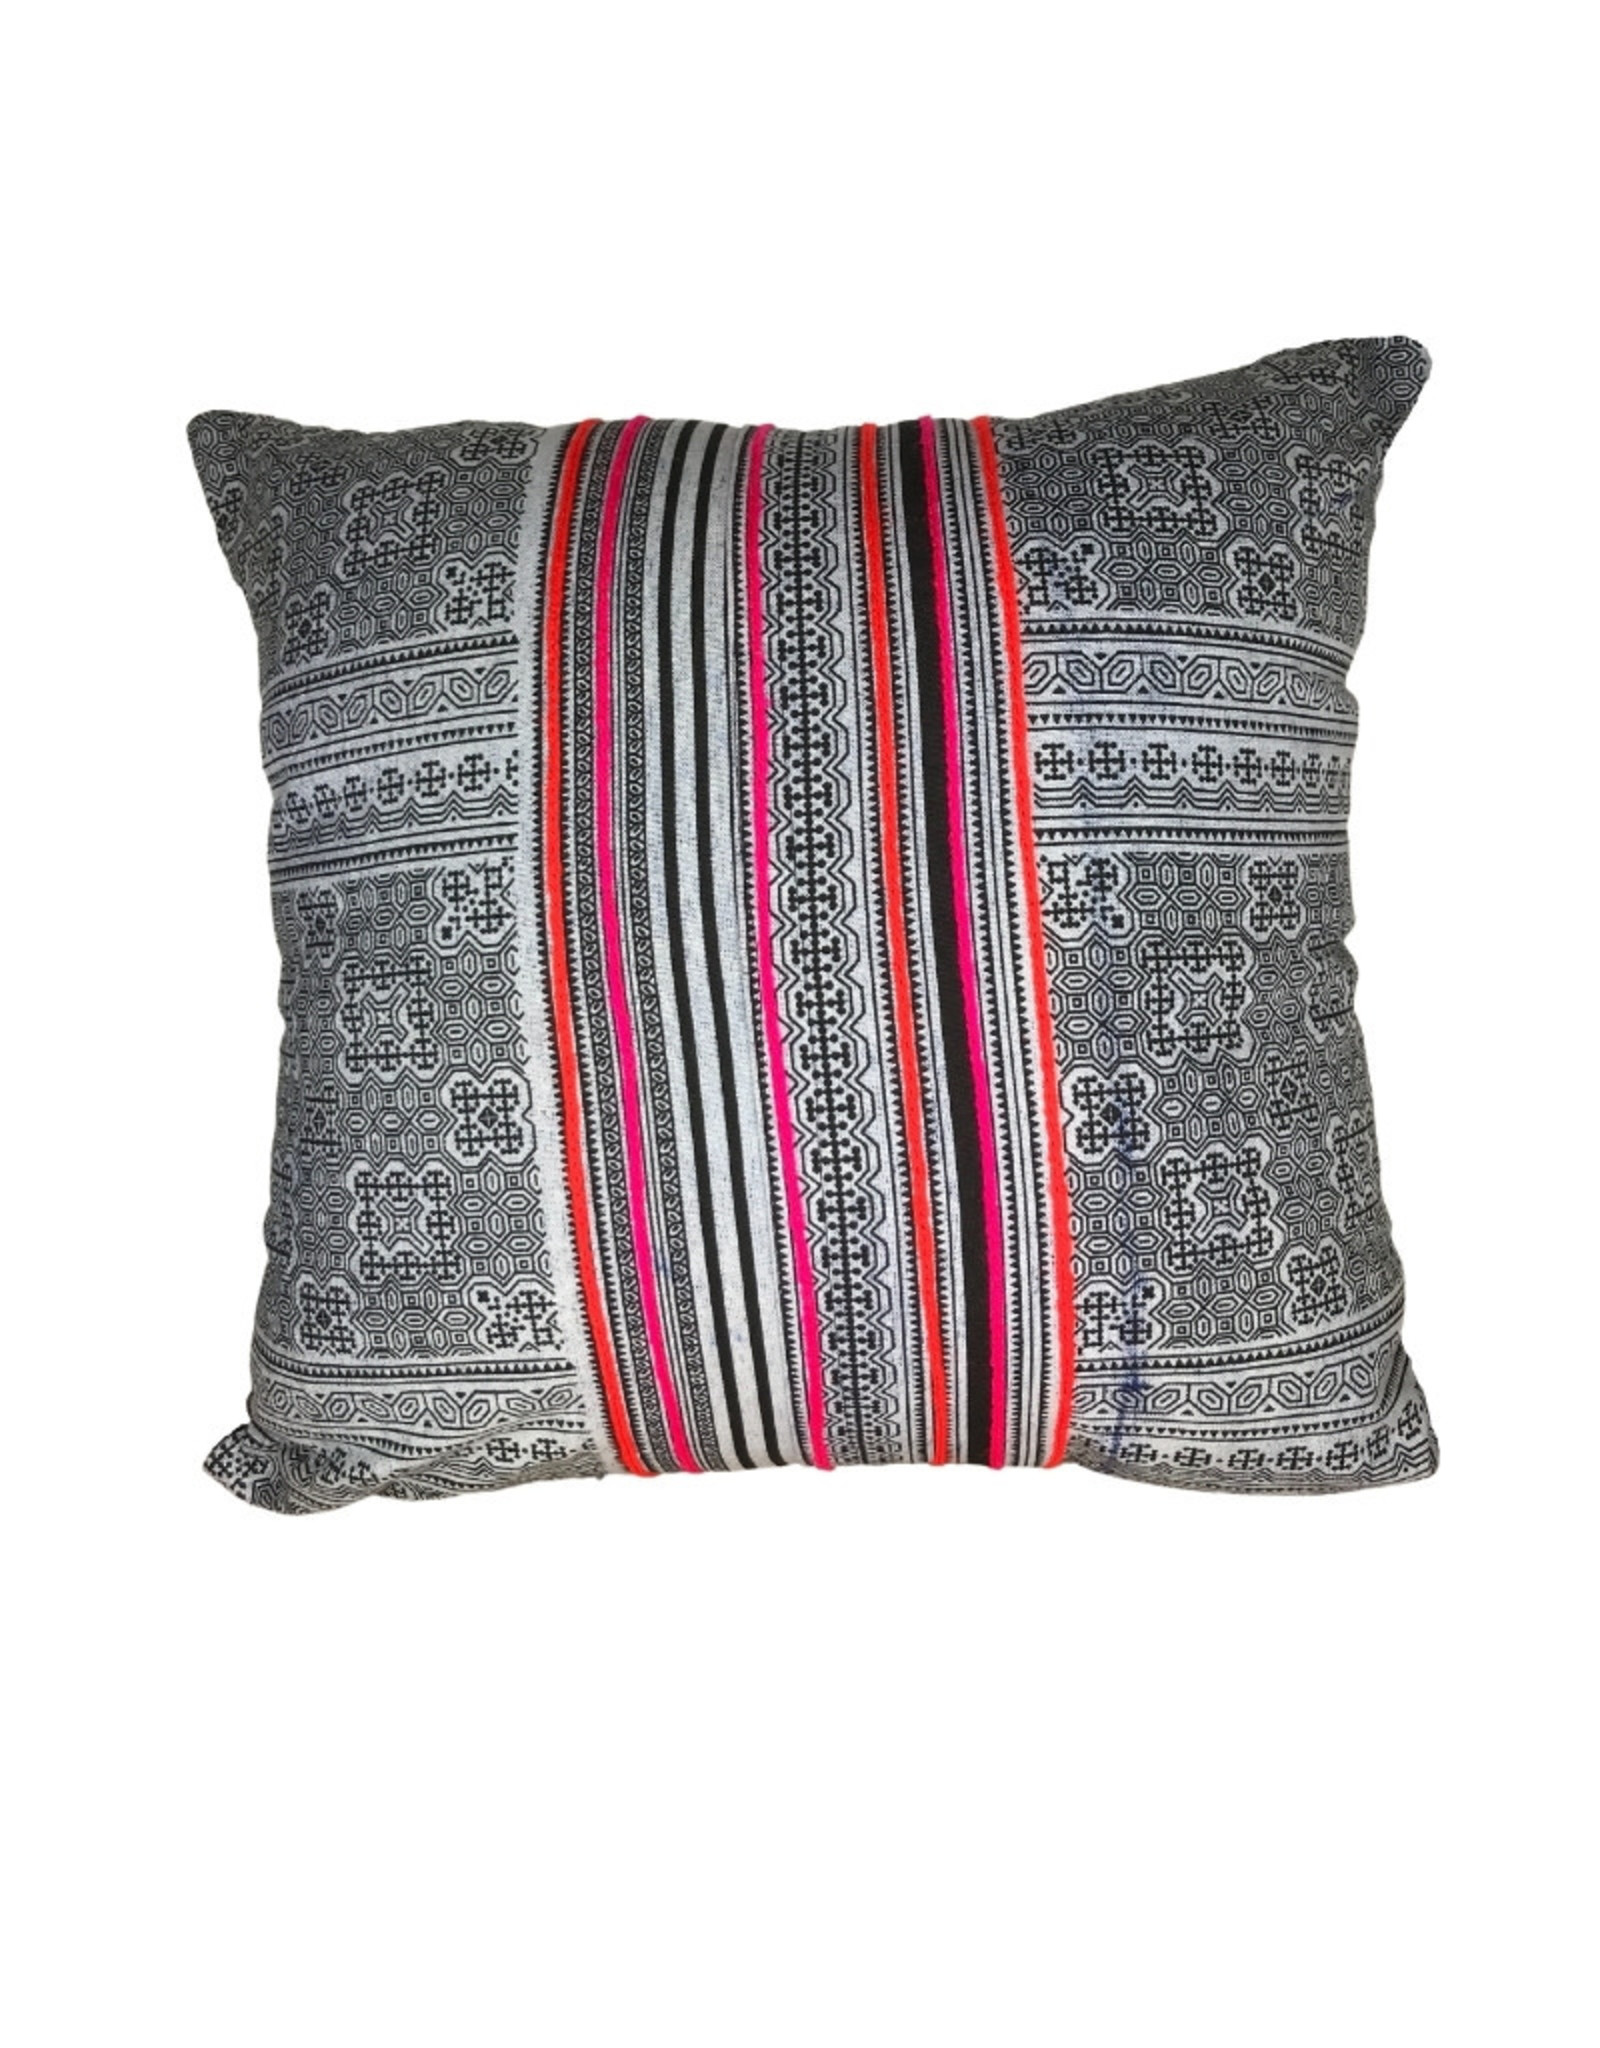 Ten Thousand Villages Pillow Cushion Cover Striped Grey/Black/Red - Thailand